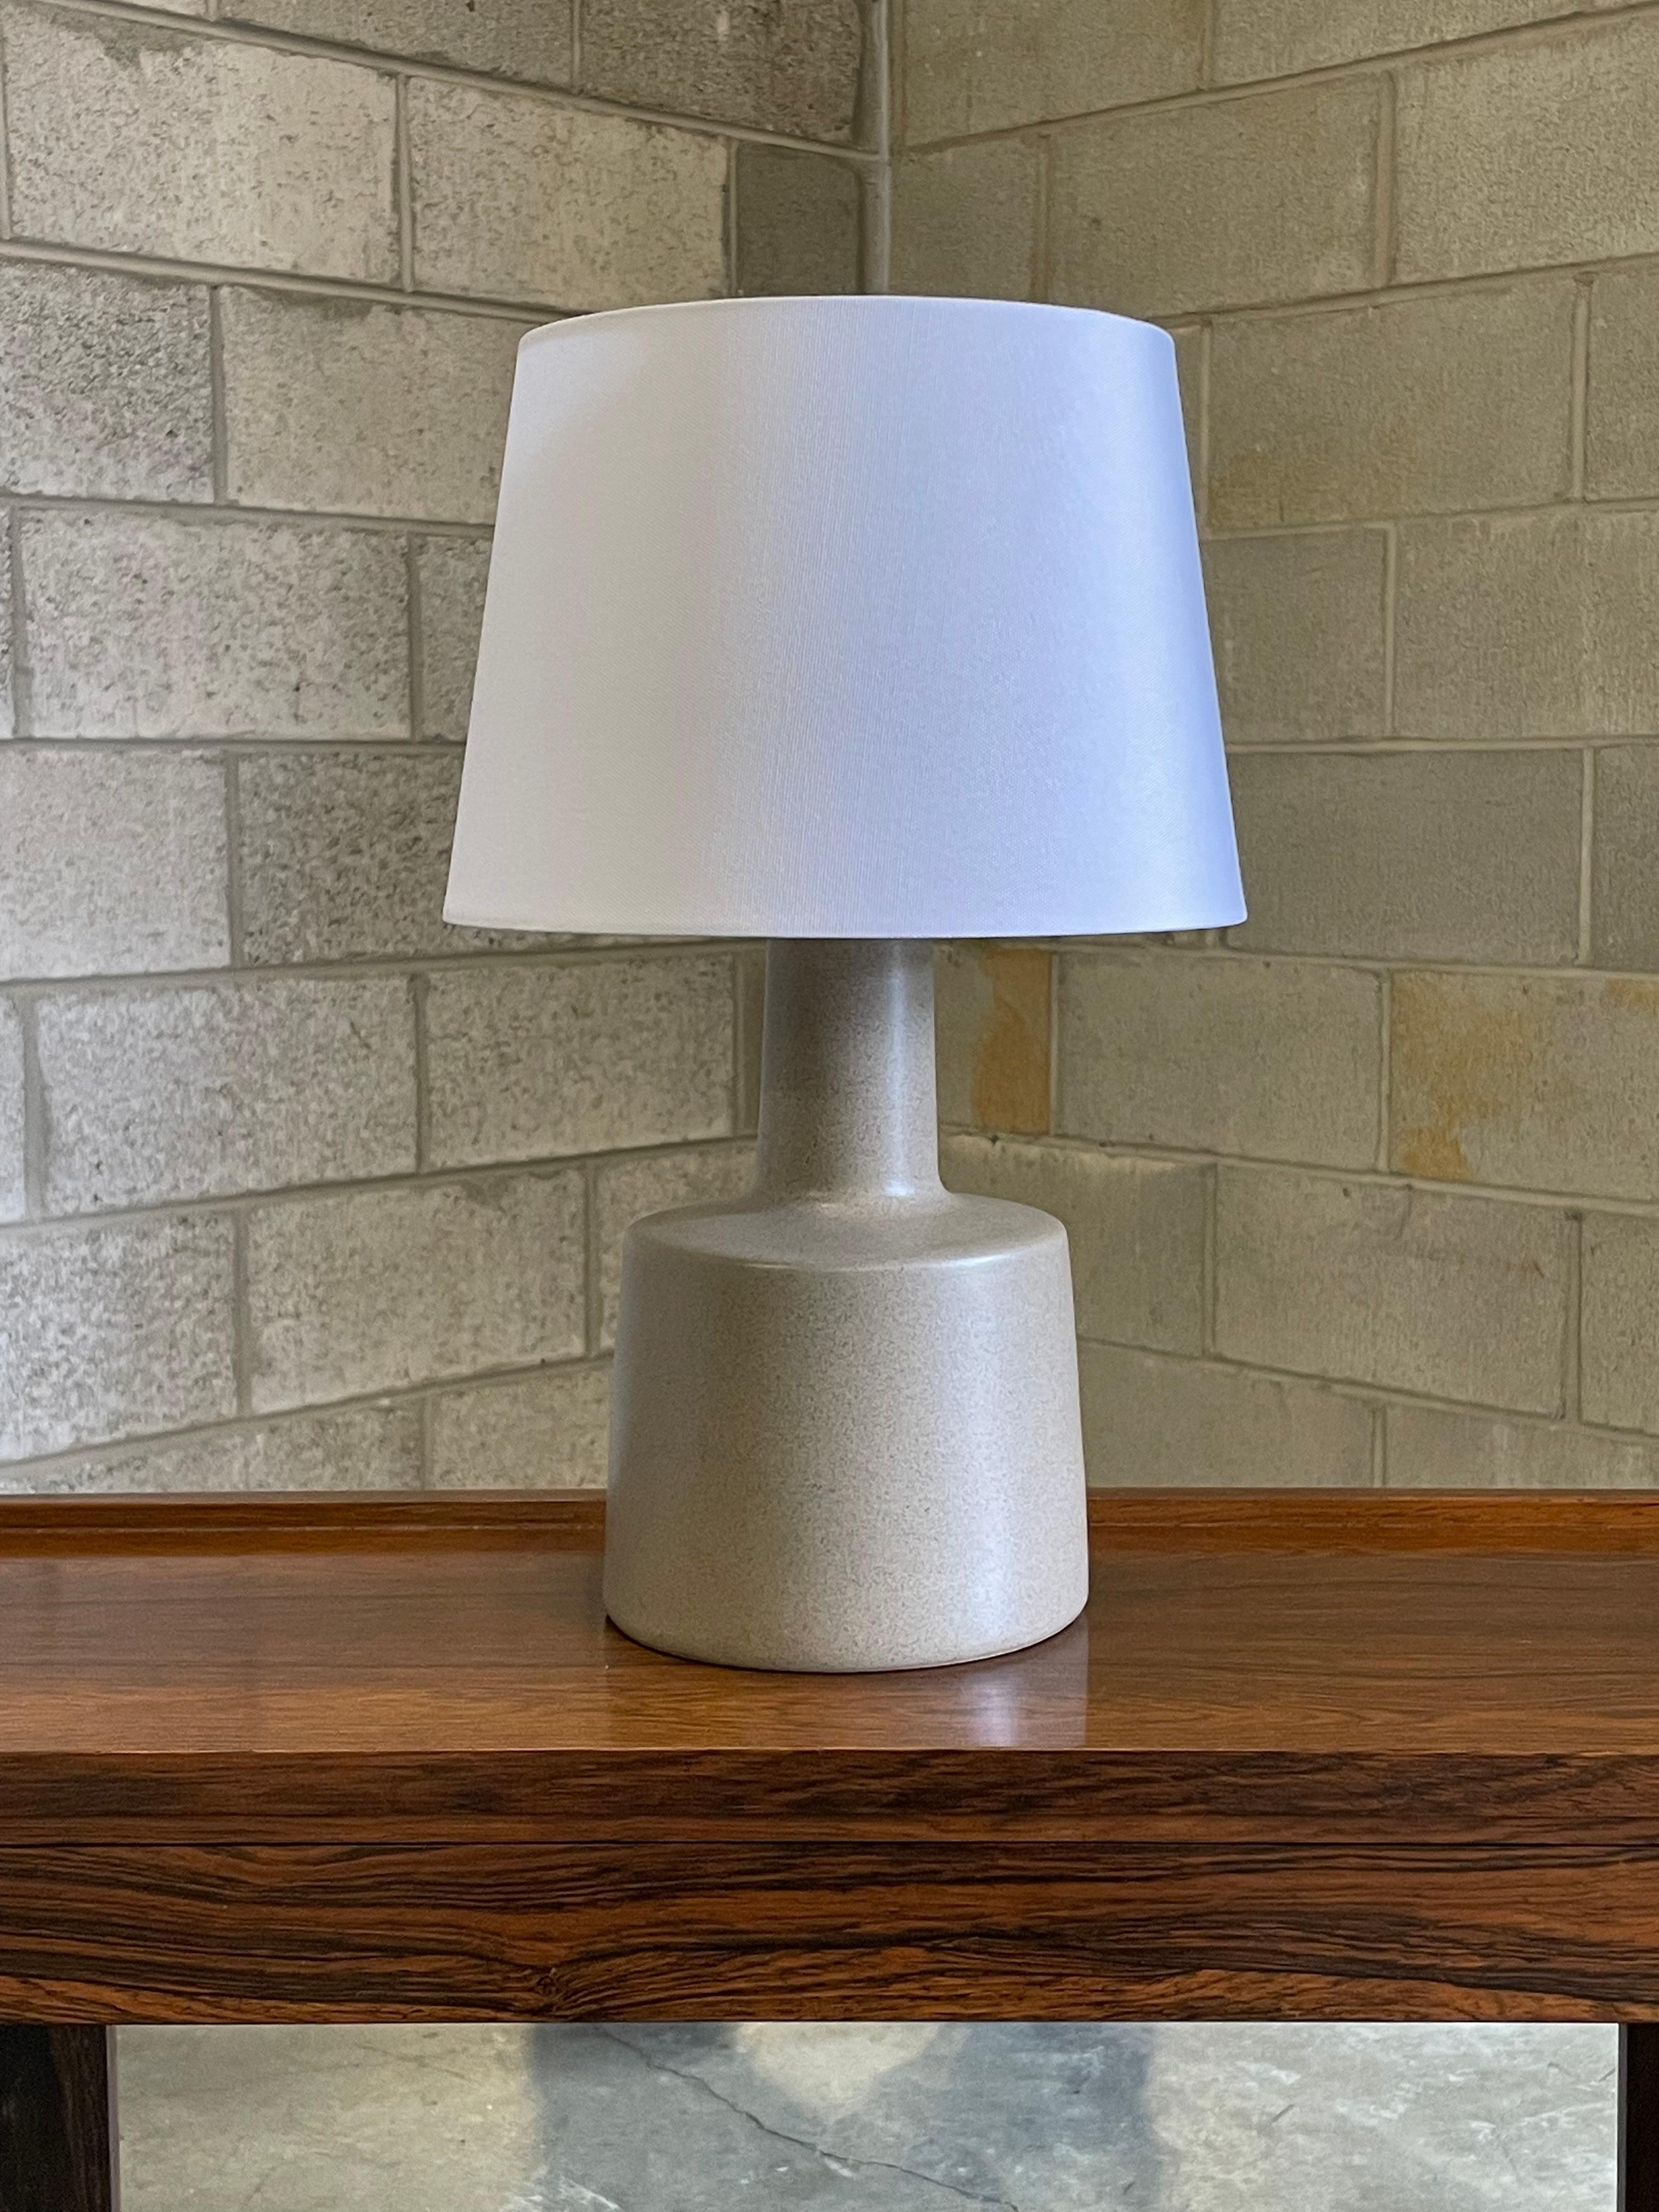 Wonderful beige/ grey ceramic body with blue speckles by famed ceramicist duo Jane and Gordon Martz for Marshall Studios. Great texture, shape, and color. This lamp would work well in a variety of interiors: modern, contemporary, boho chic,